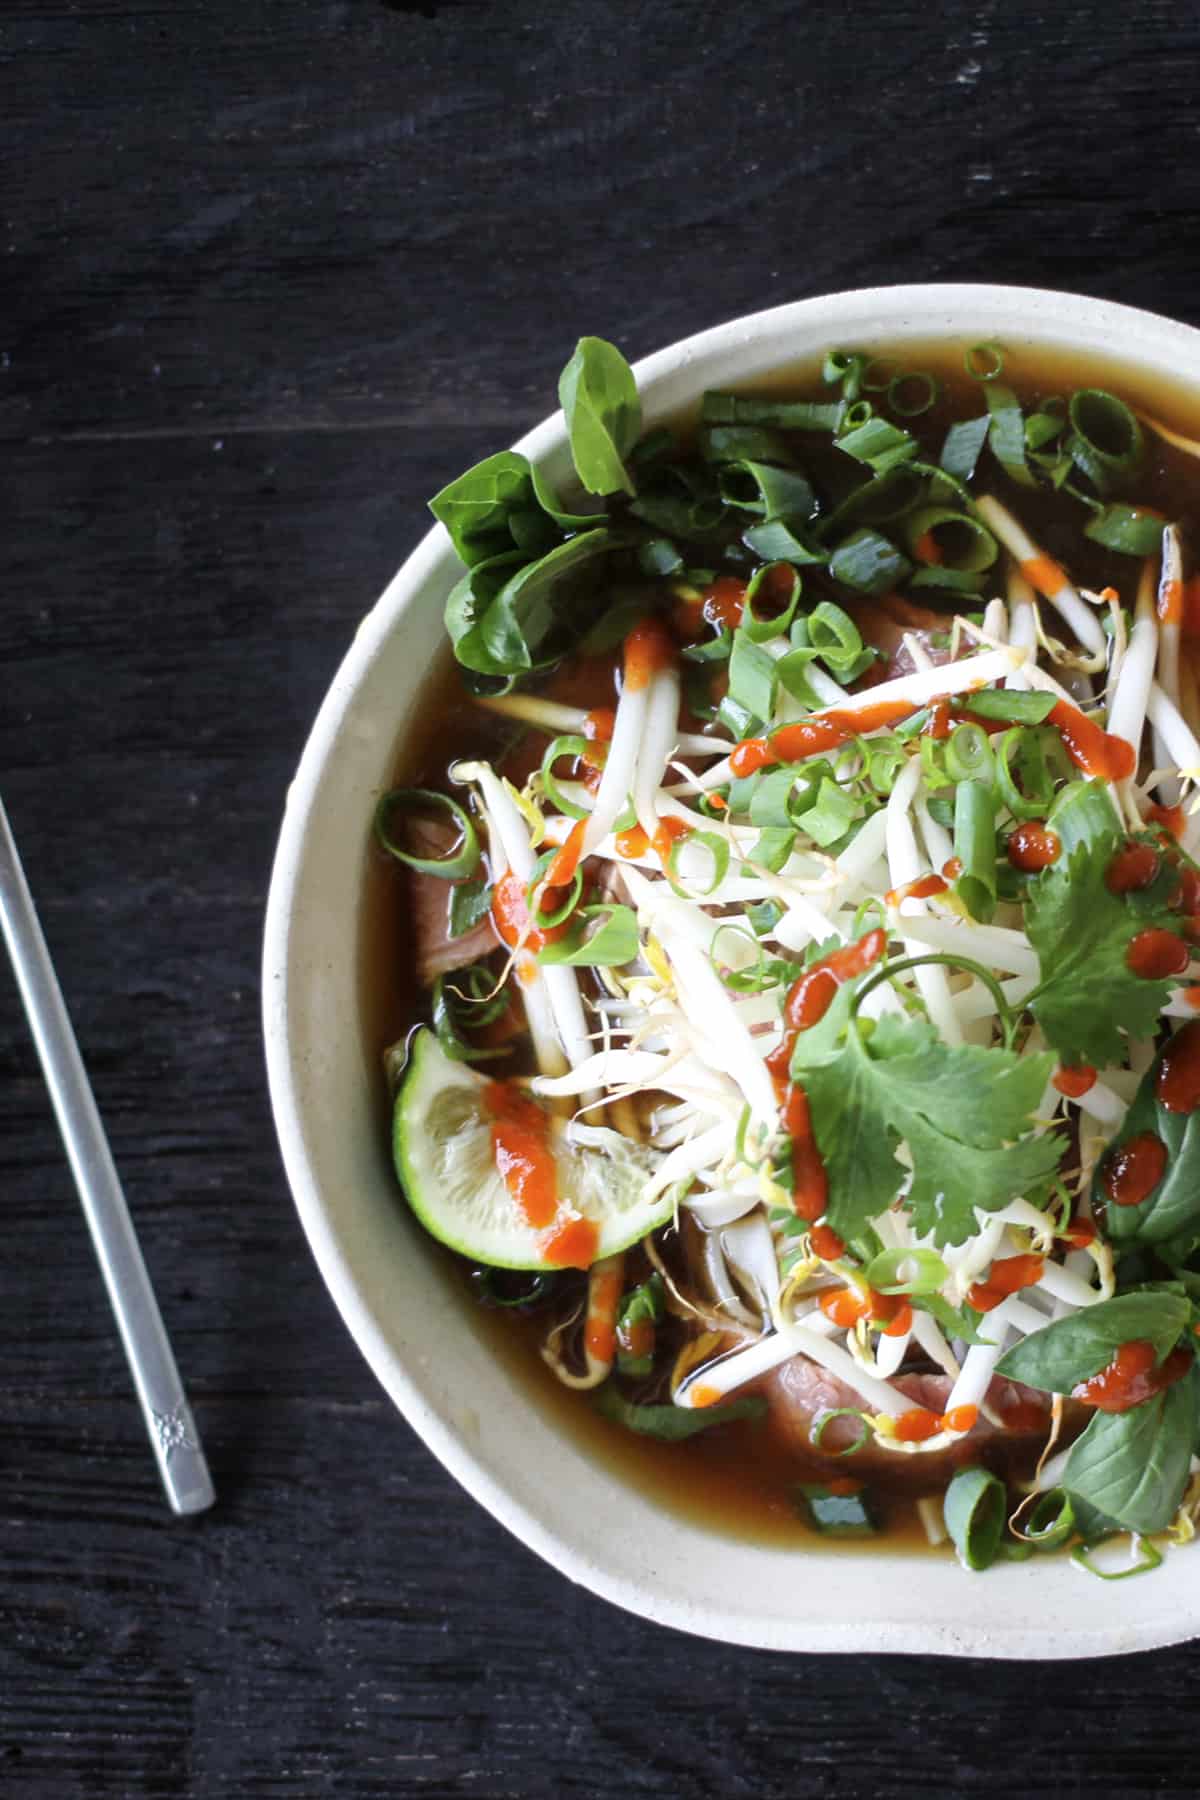 https://www.foodiewithfamily.com/wp-content/uploads/2023/03/pho-recipe-3.jpg